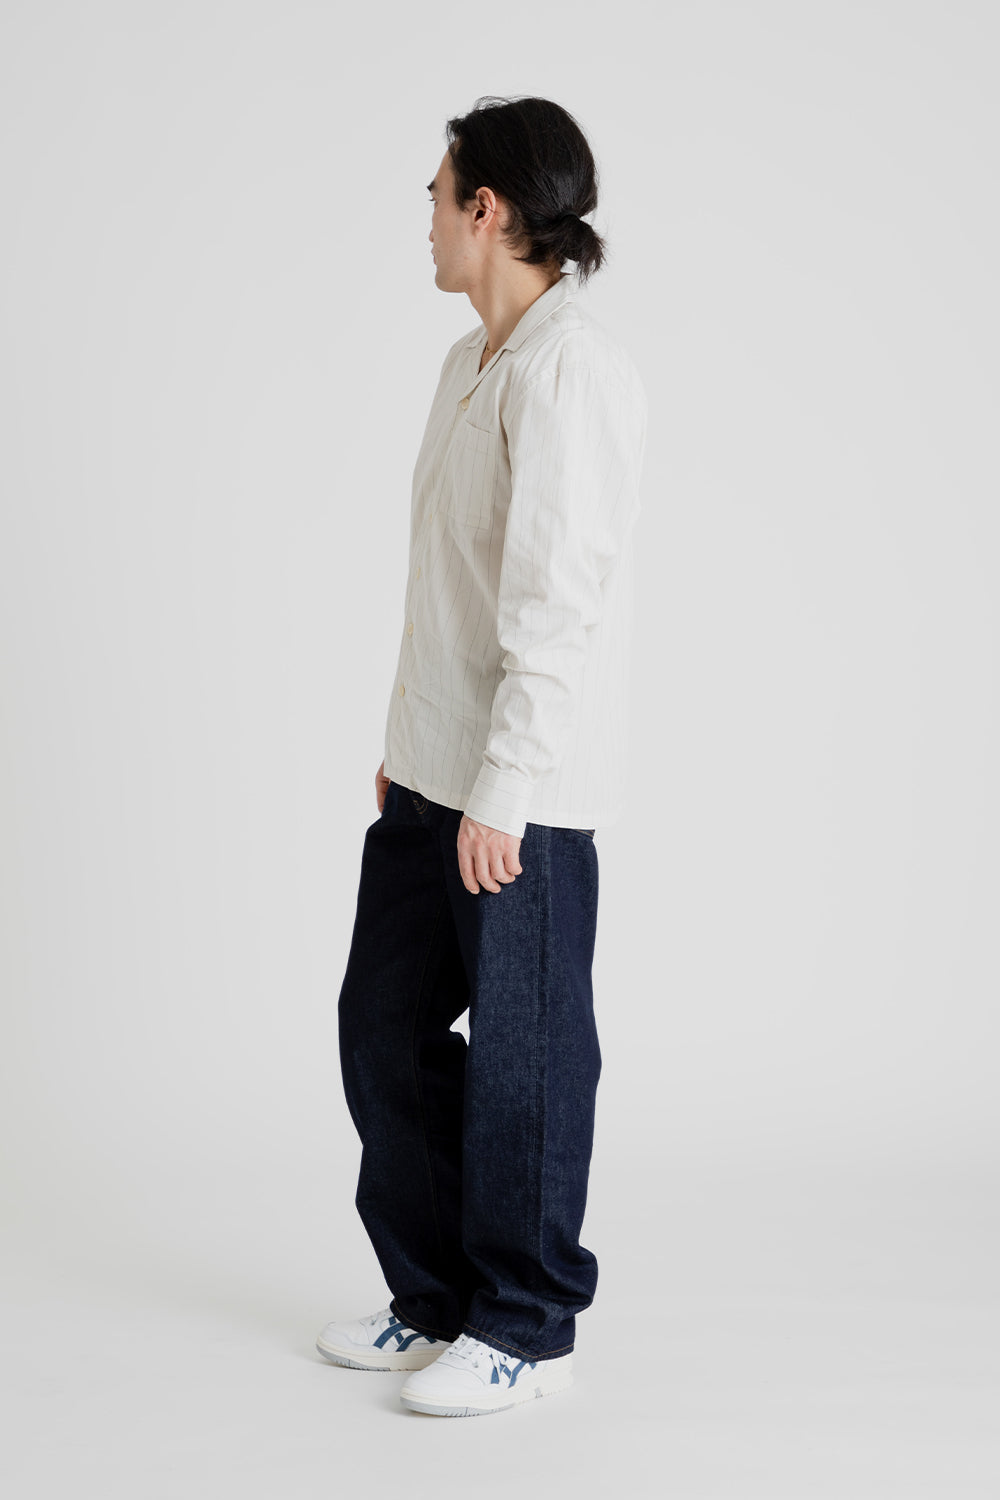 Foret Cruise Shirt in Cloud/Stripe